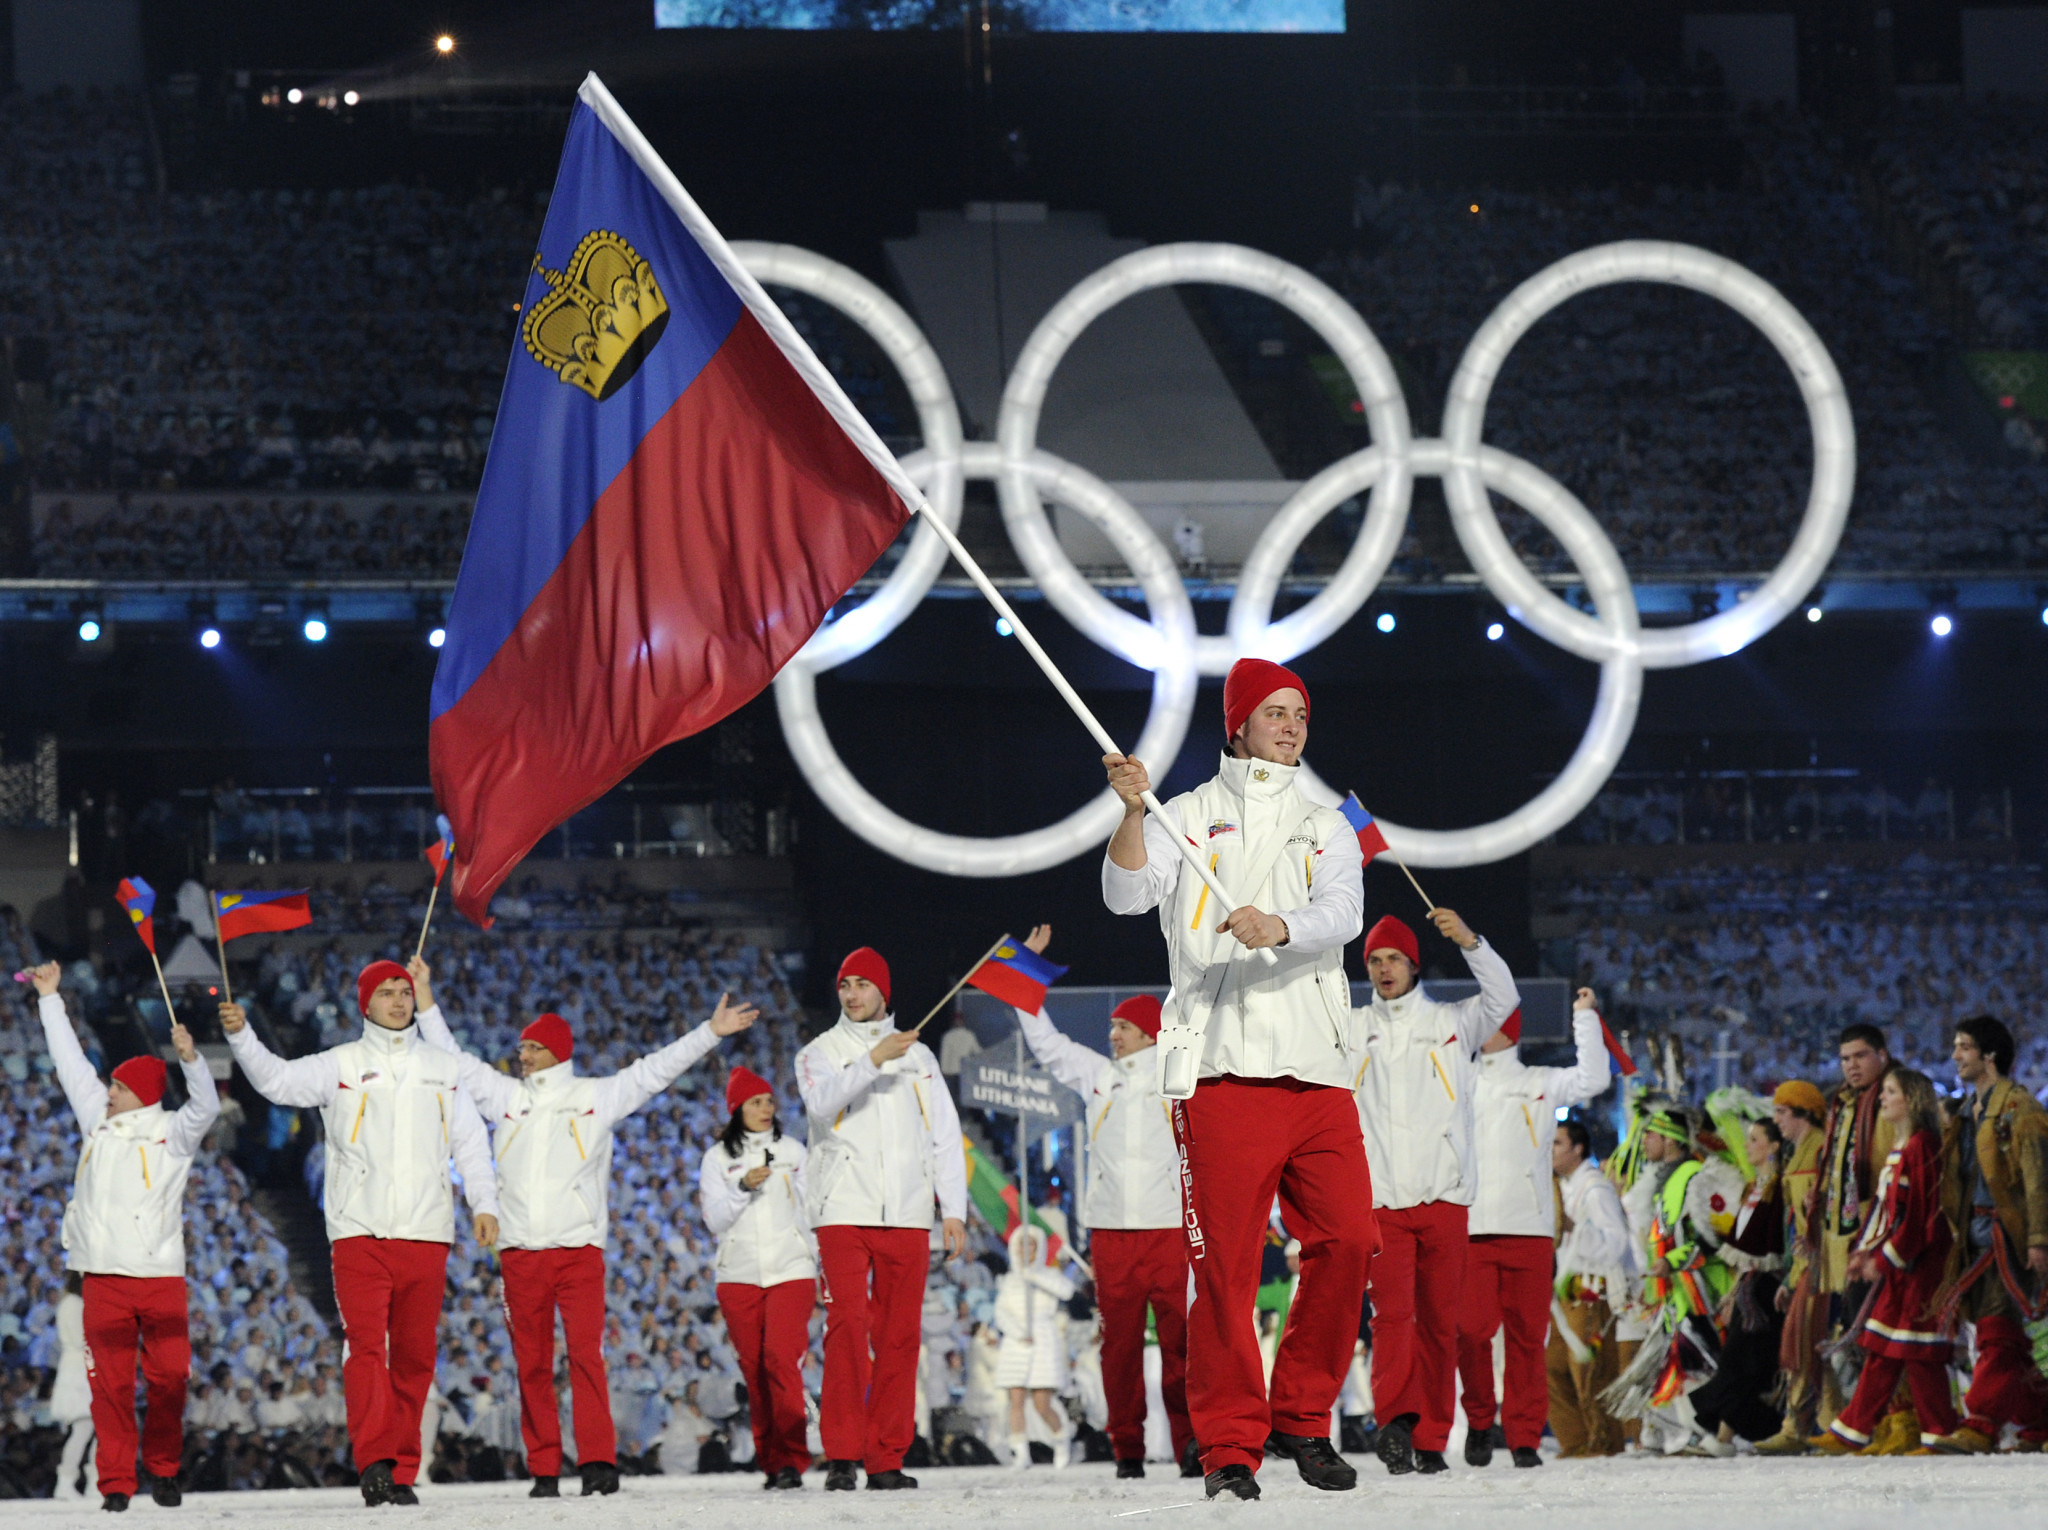 Liechtenstein is the only country to have won medals at the Winter Olympics but not at the Summer Games  ©Getty Images